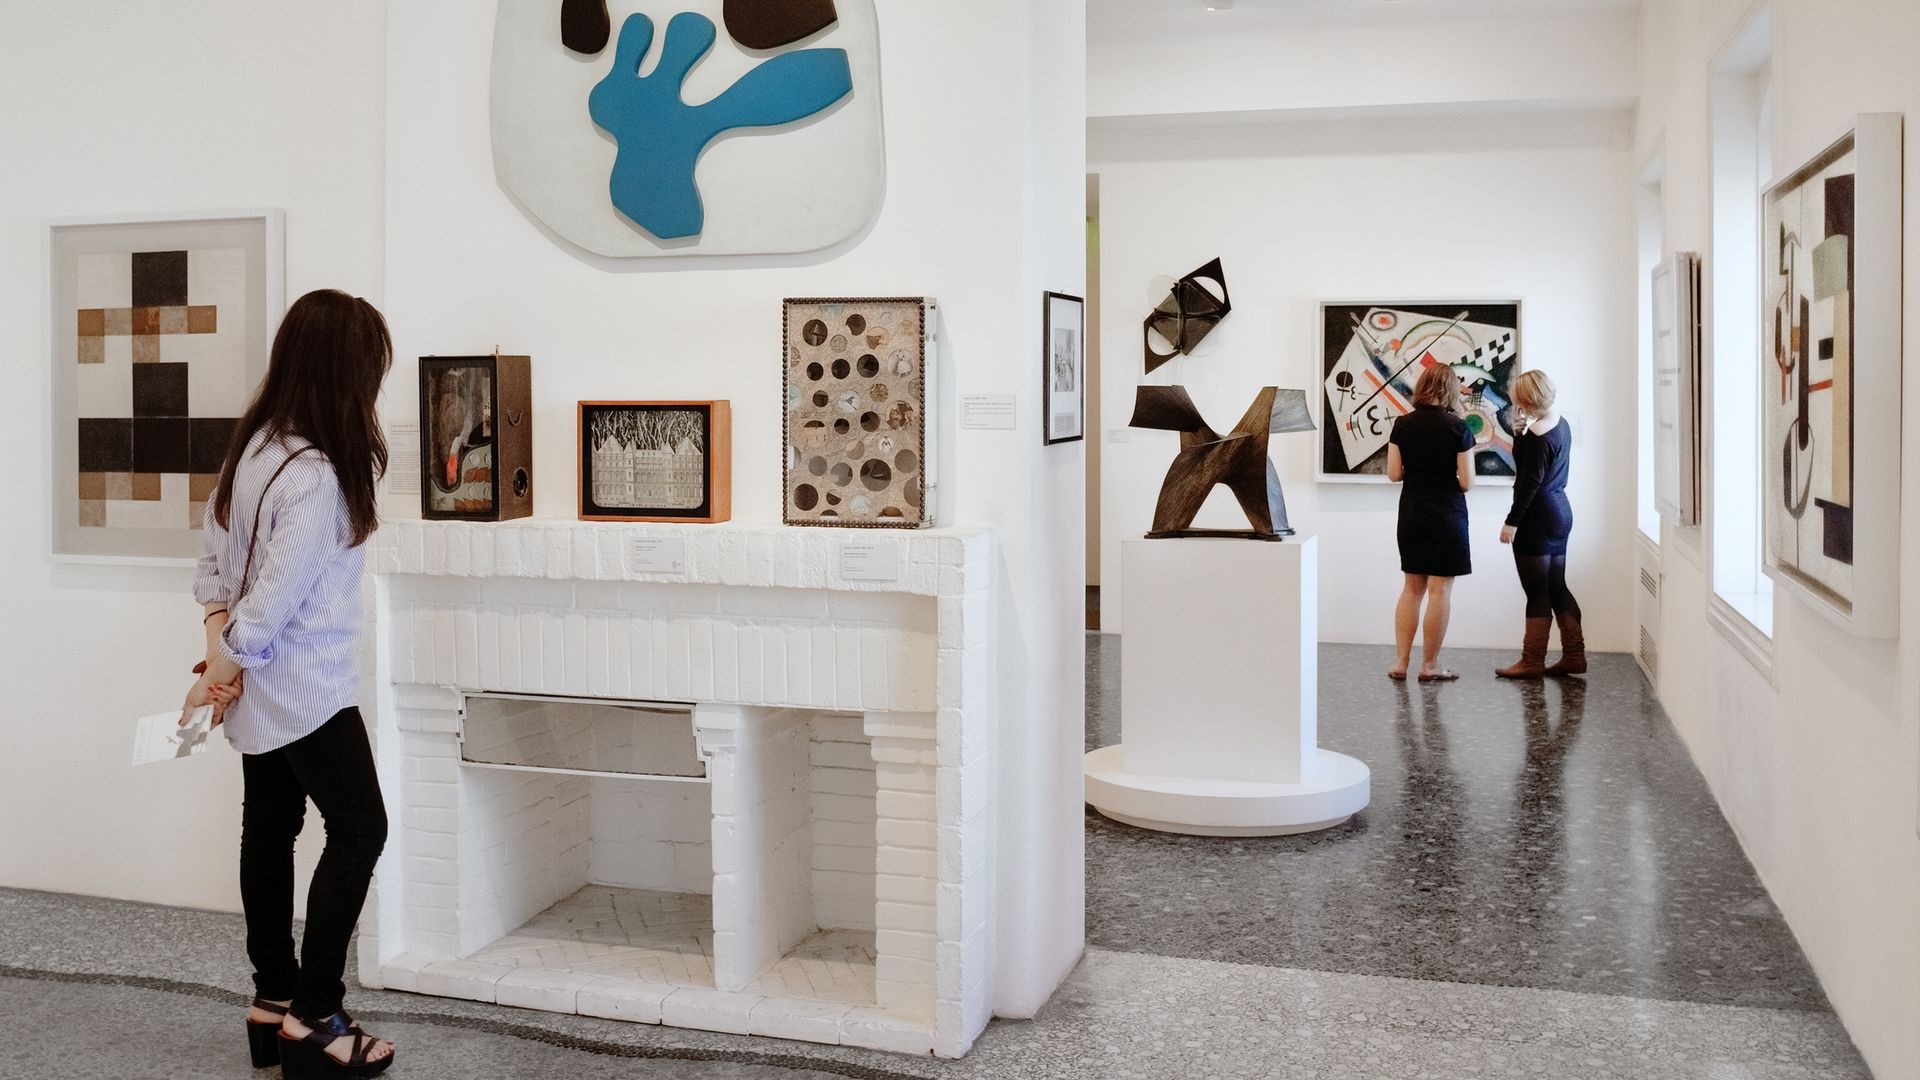 Peggy Guggenheim Collection: Fast Track Ticket